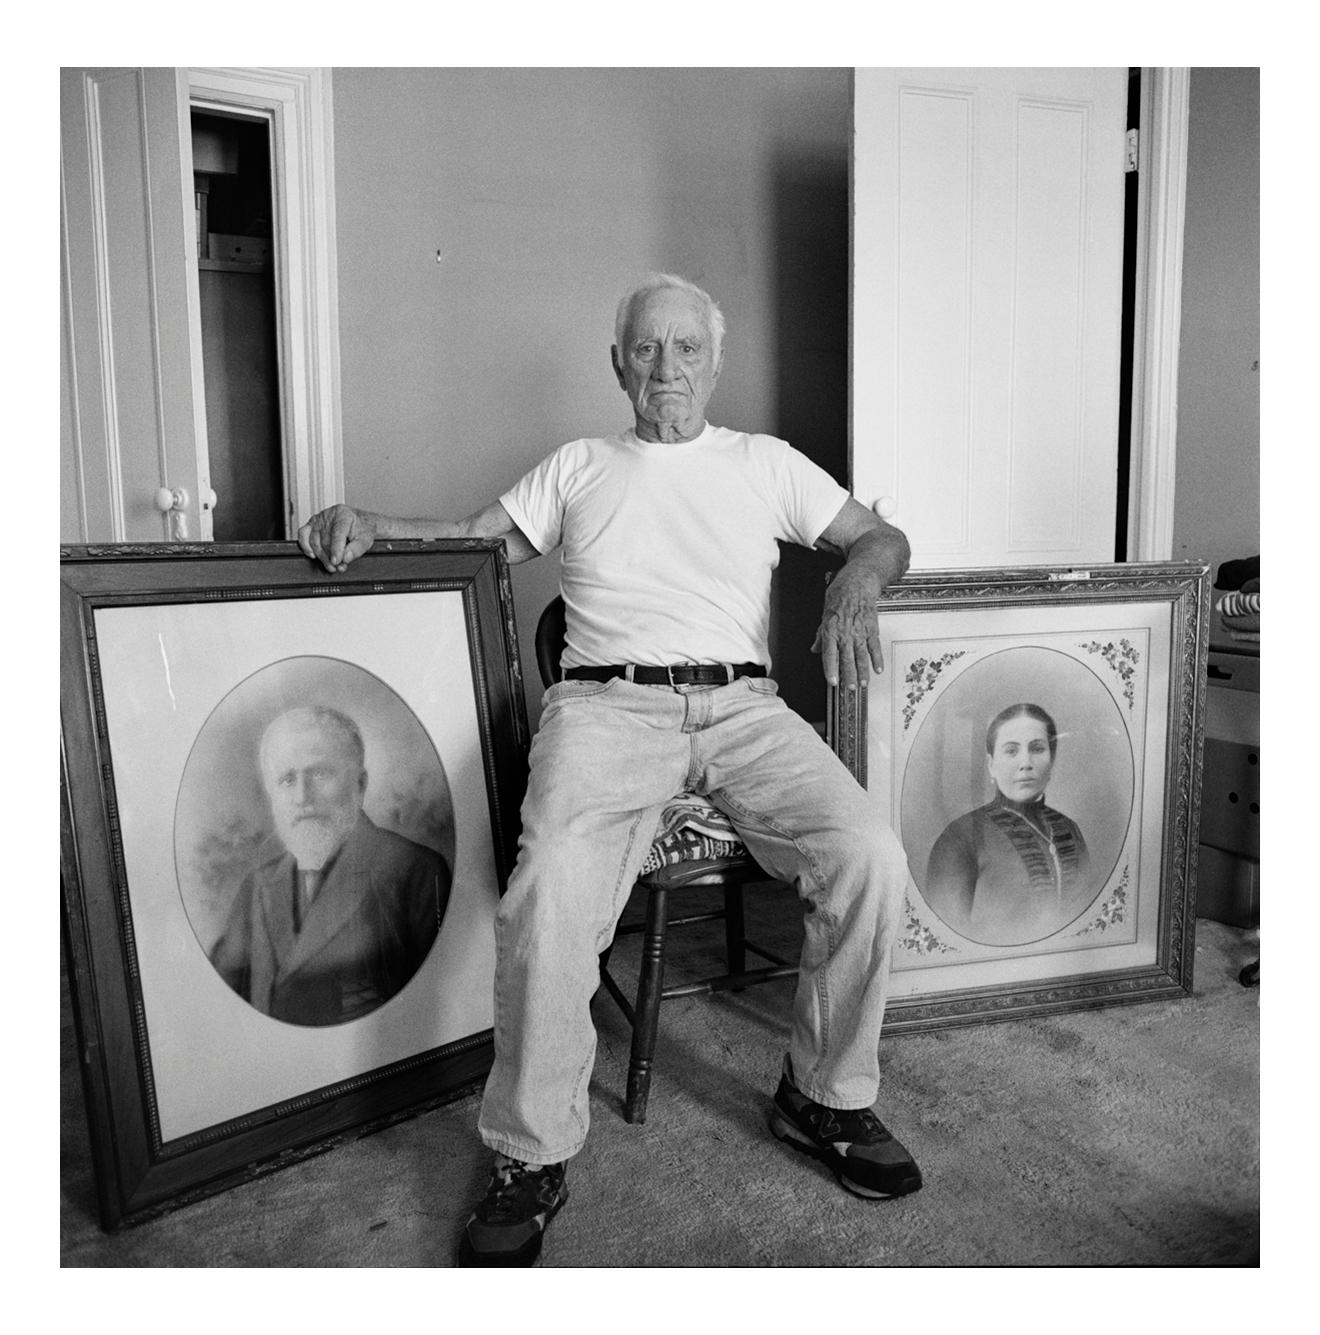 Jonathan Becker Portrait Photograph - Elia Kazan with portraits of his forebears, at home in New York, 28 June 1999